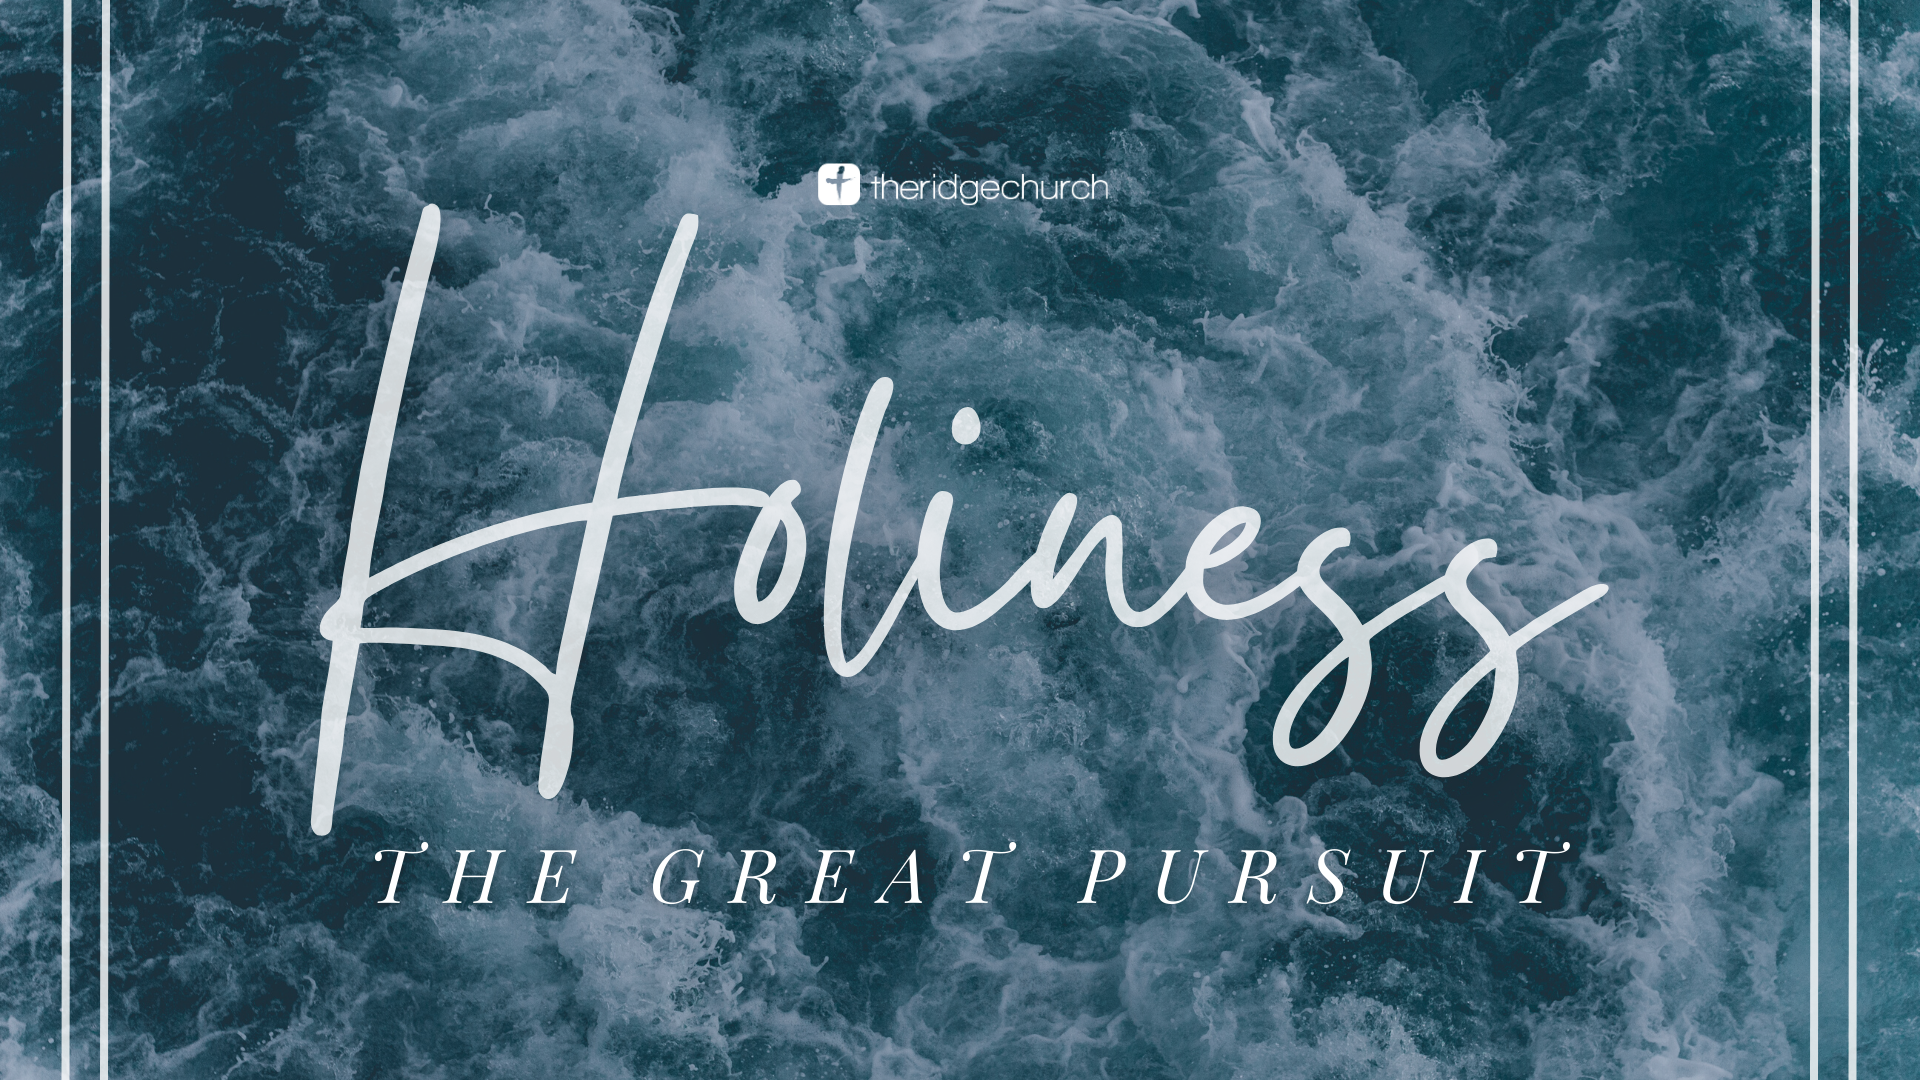 The Great Pursuit: Holiness banner